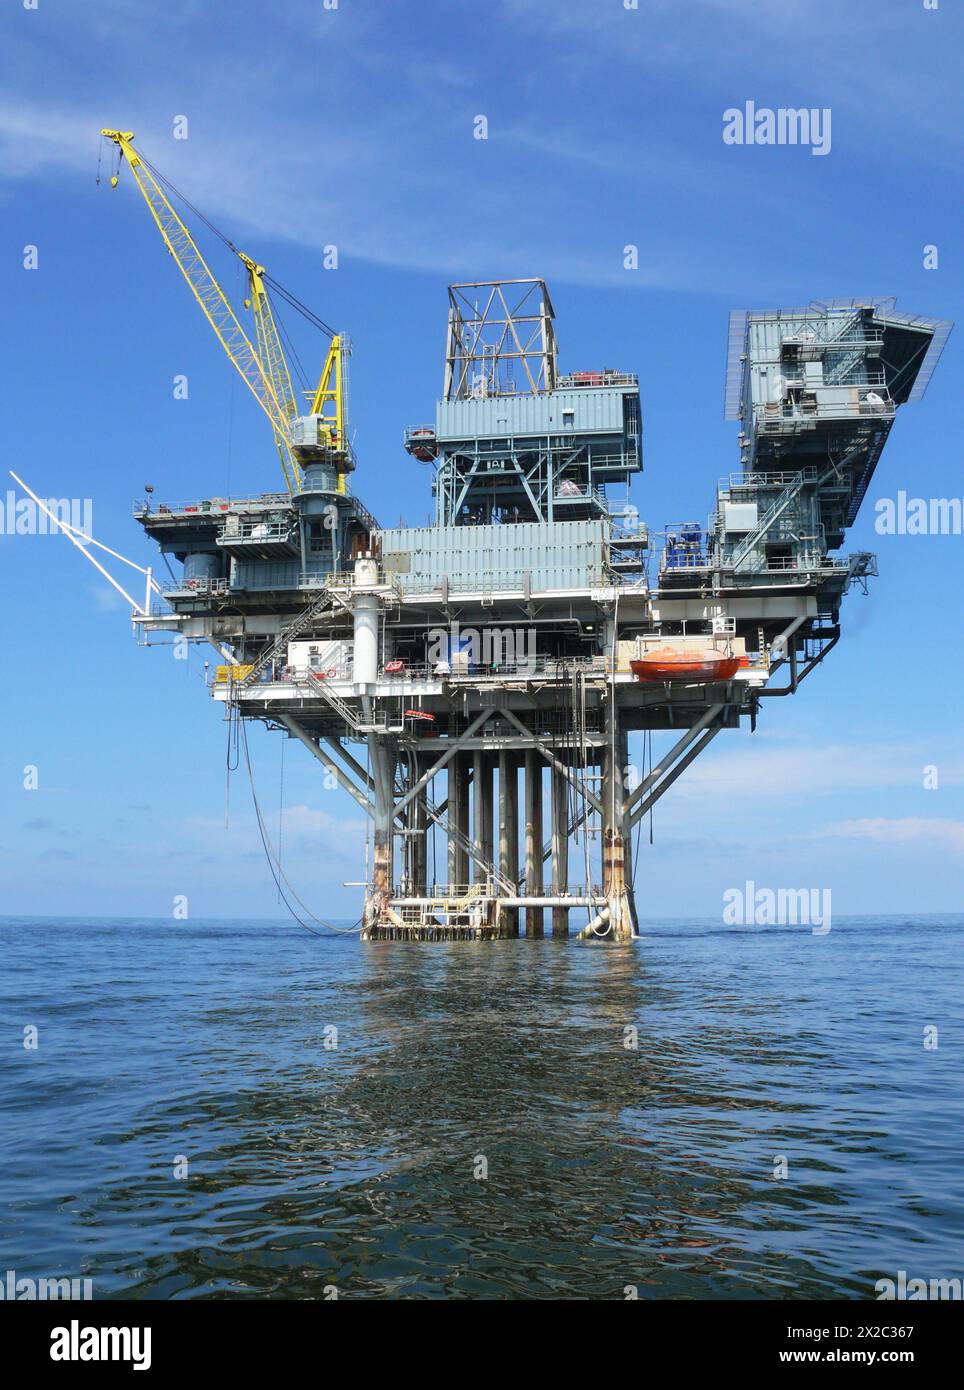 Simba 21d fixed offshore oil and gas drilling platform in the Simba oil and gas field off the SE gulf coast of Louisiana in the Mississippi Canyon. Stock Photo